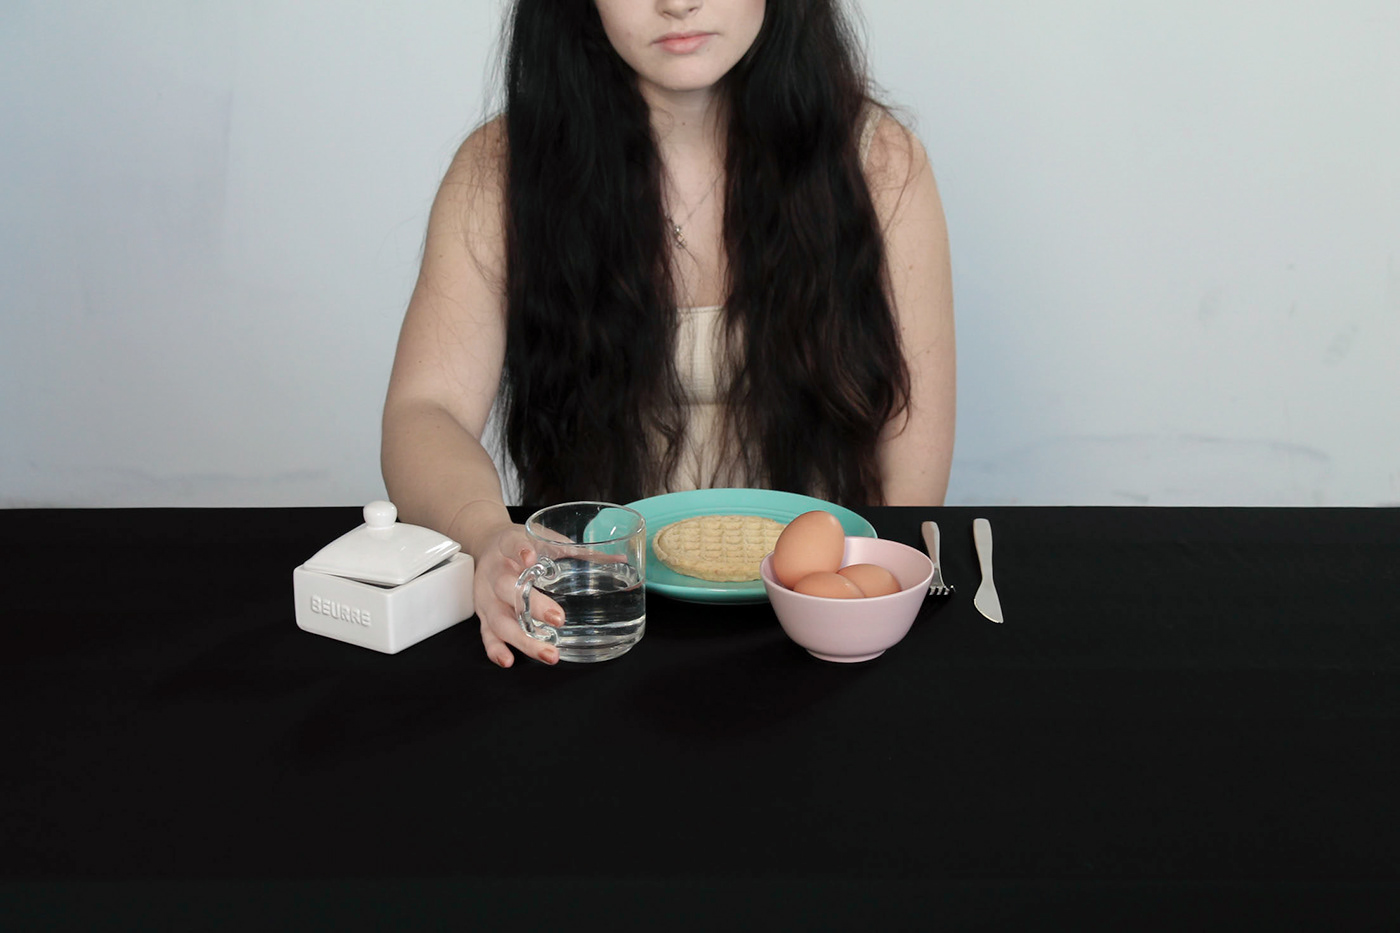 Photography  series eating disorders mental health conceptual art pastel pale Fashion  Narrative Photography dark